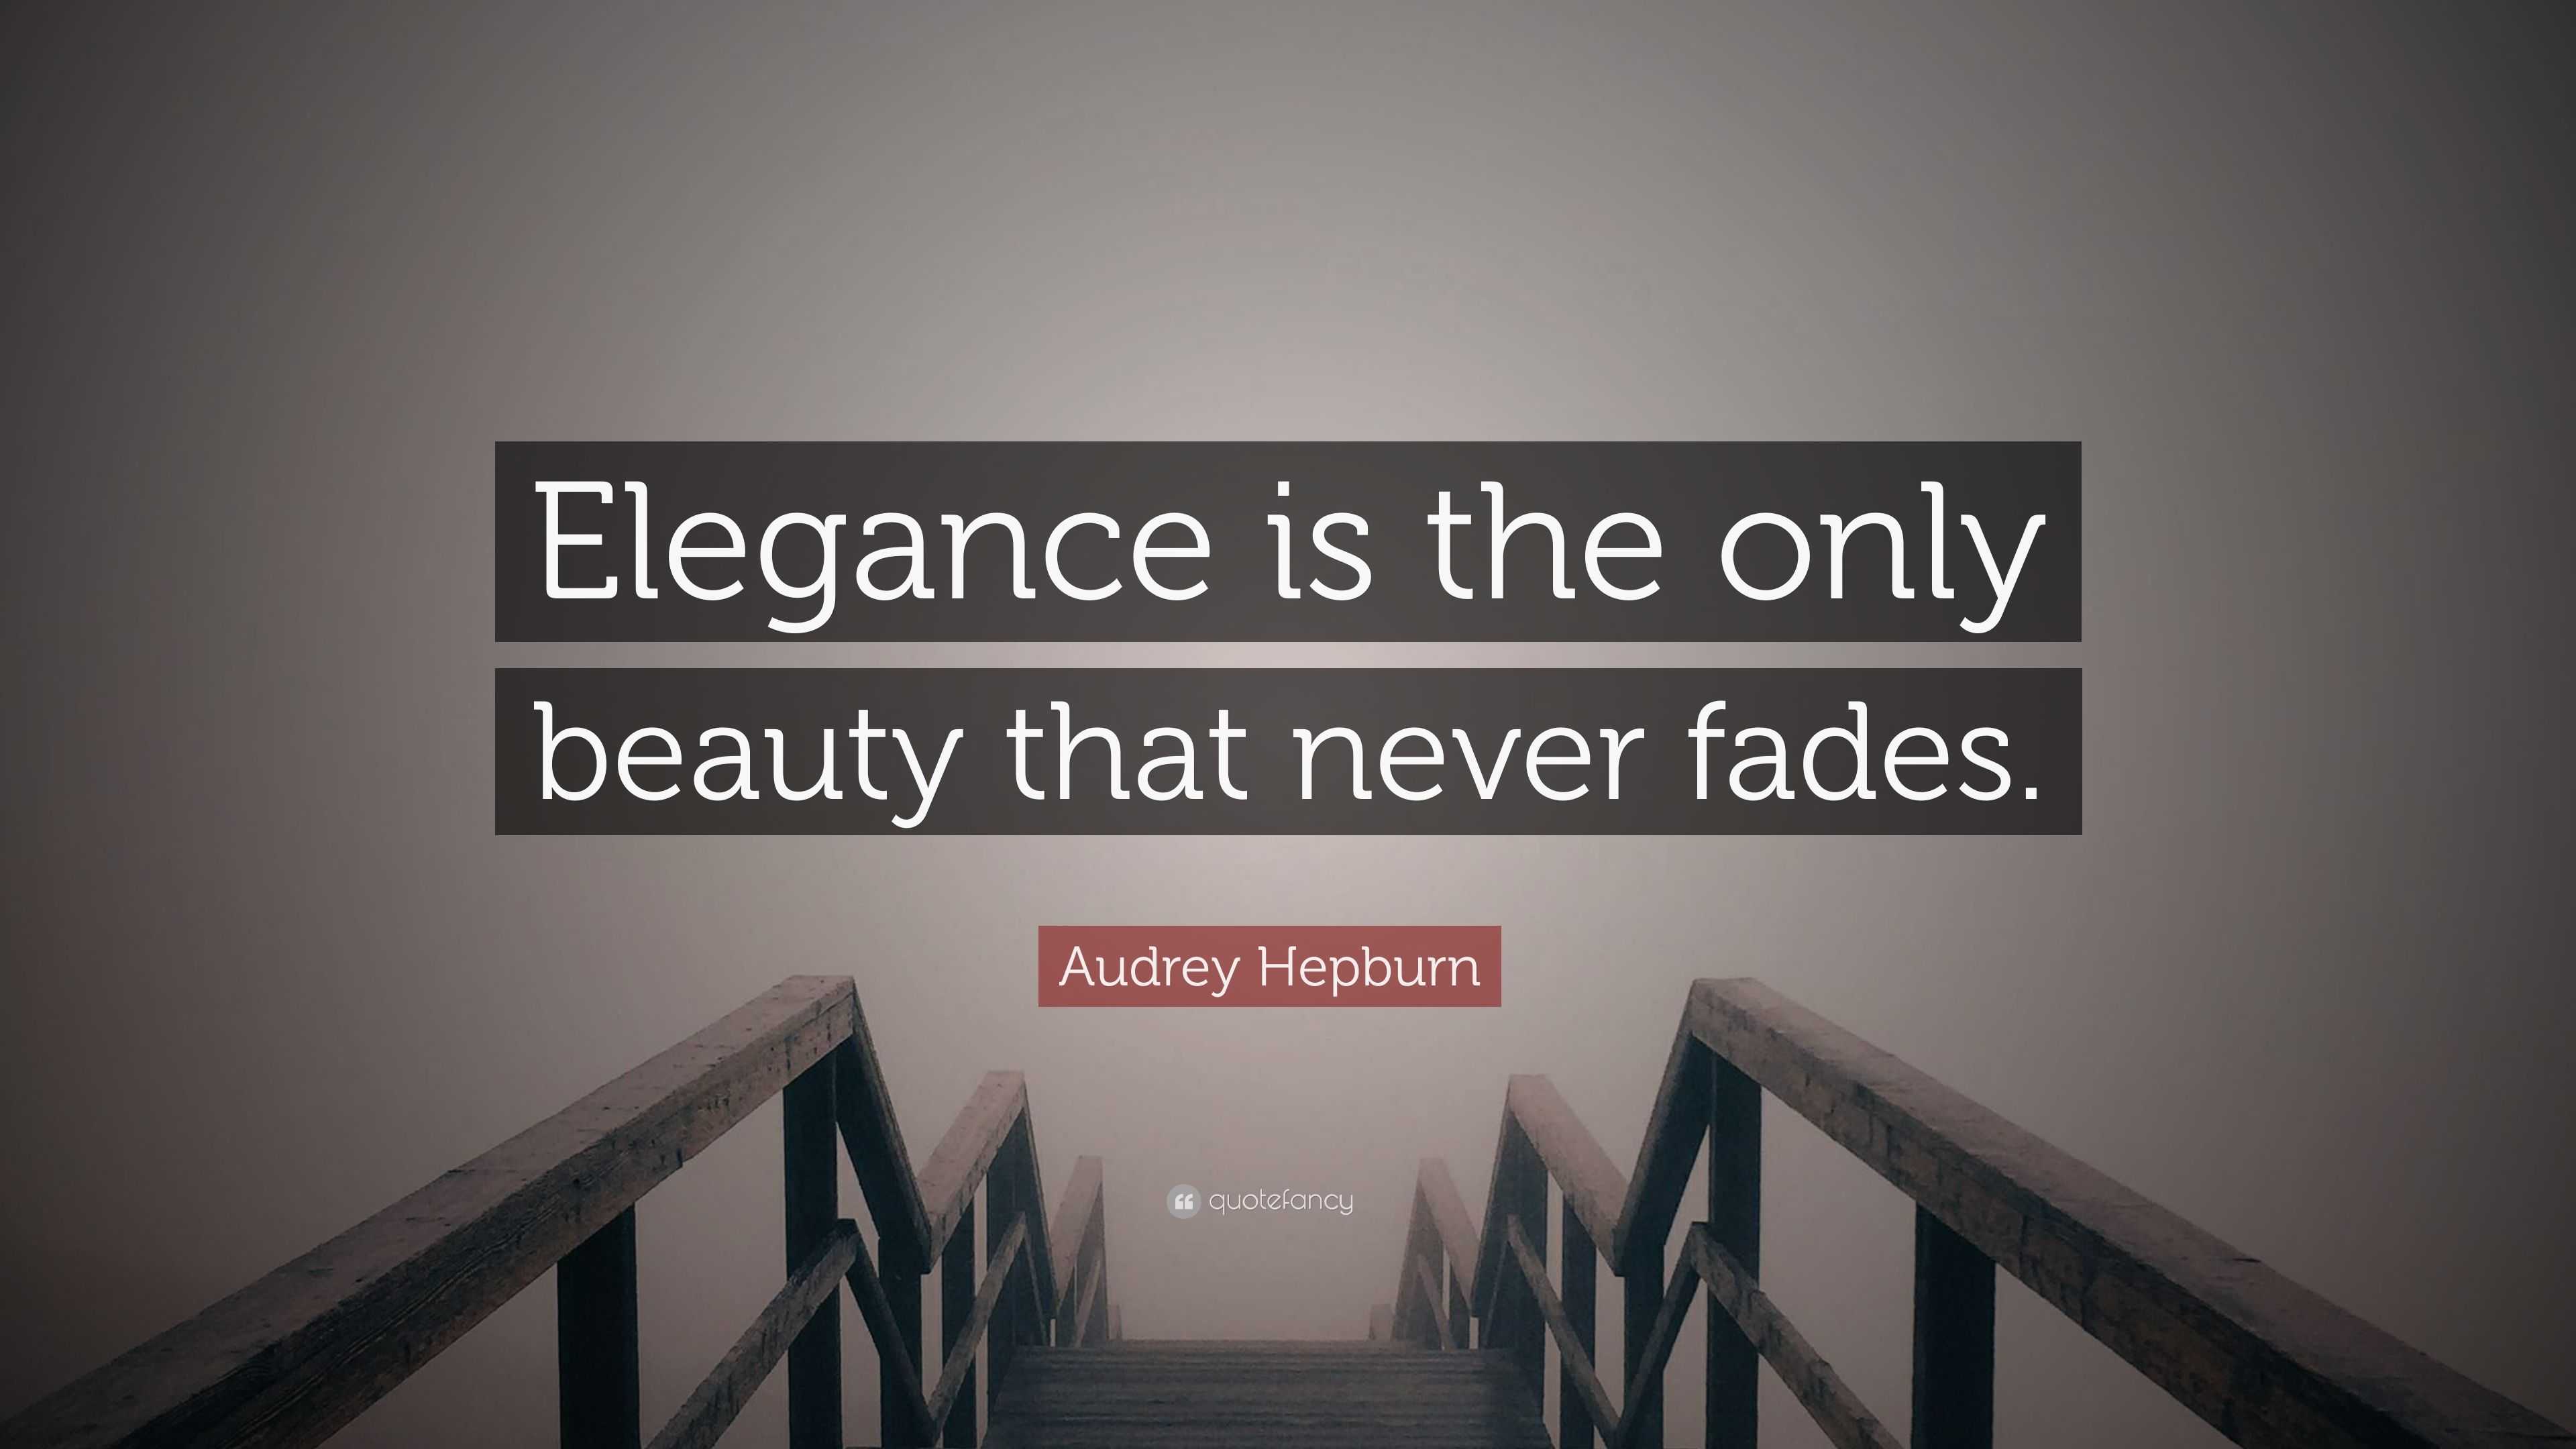 Elegance is the only beauty that never fades - Audrey Hepburn' I'm